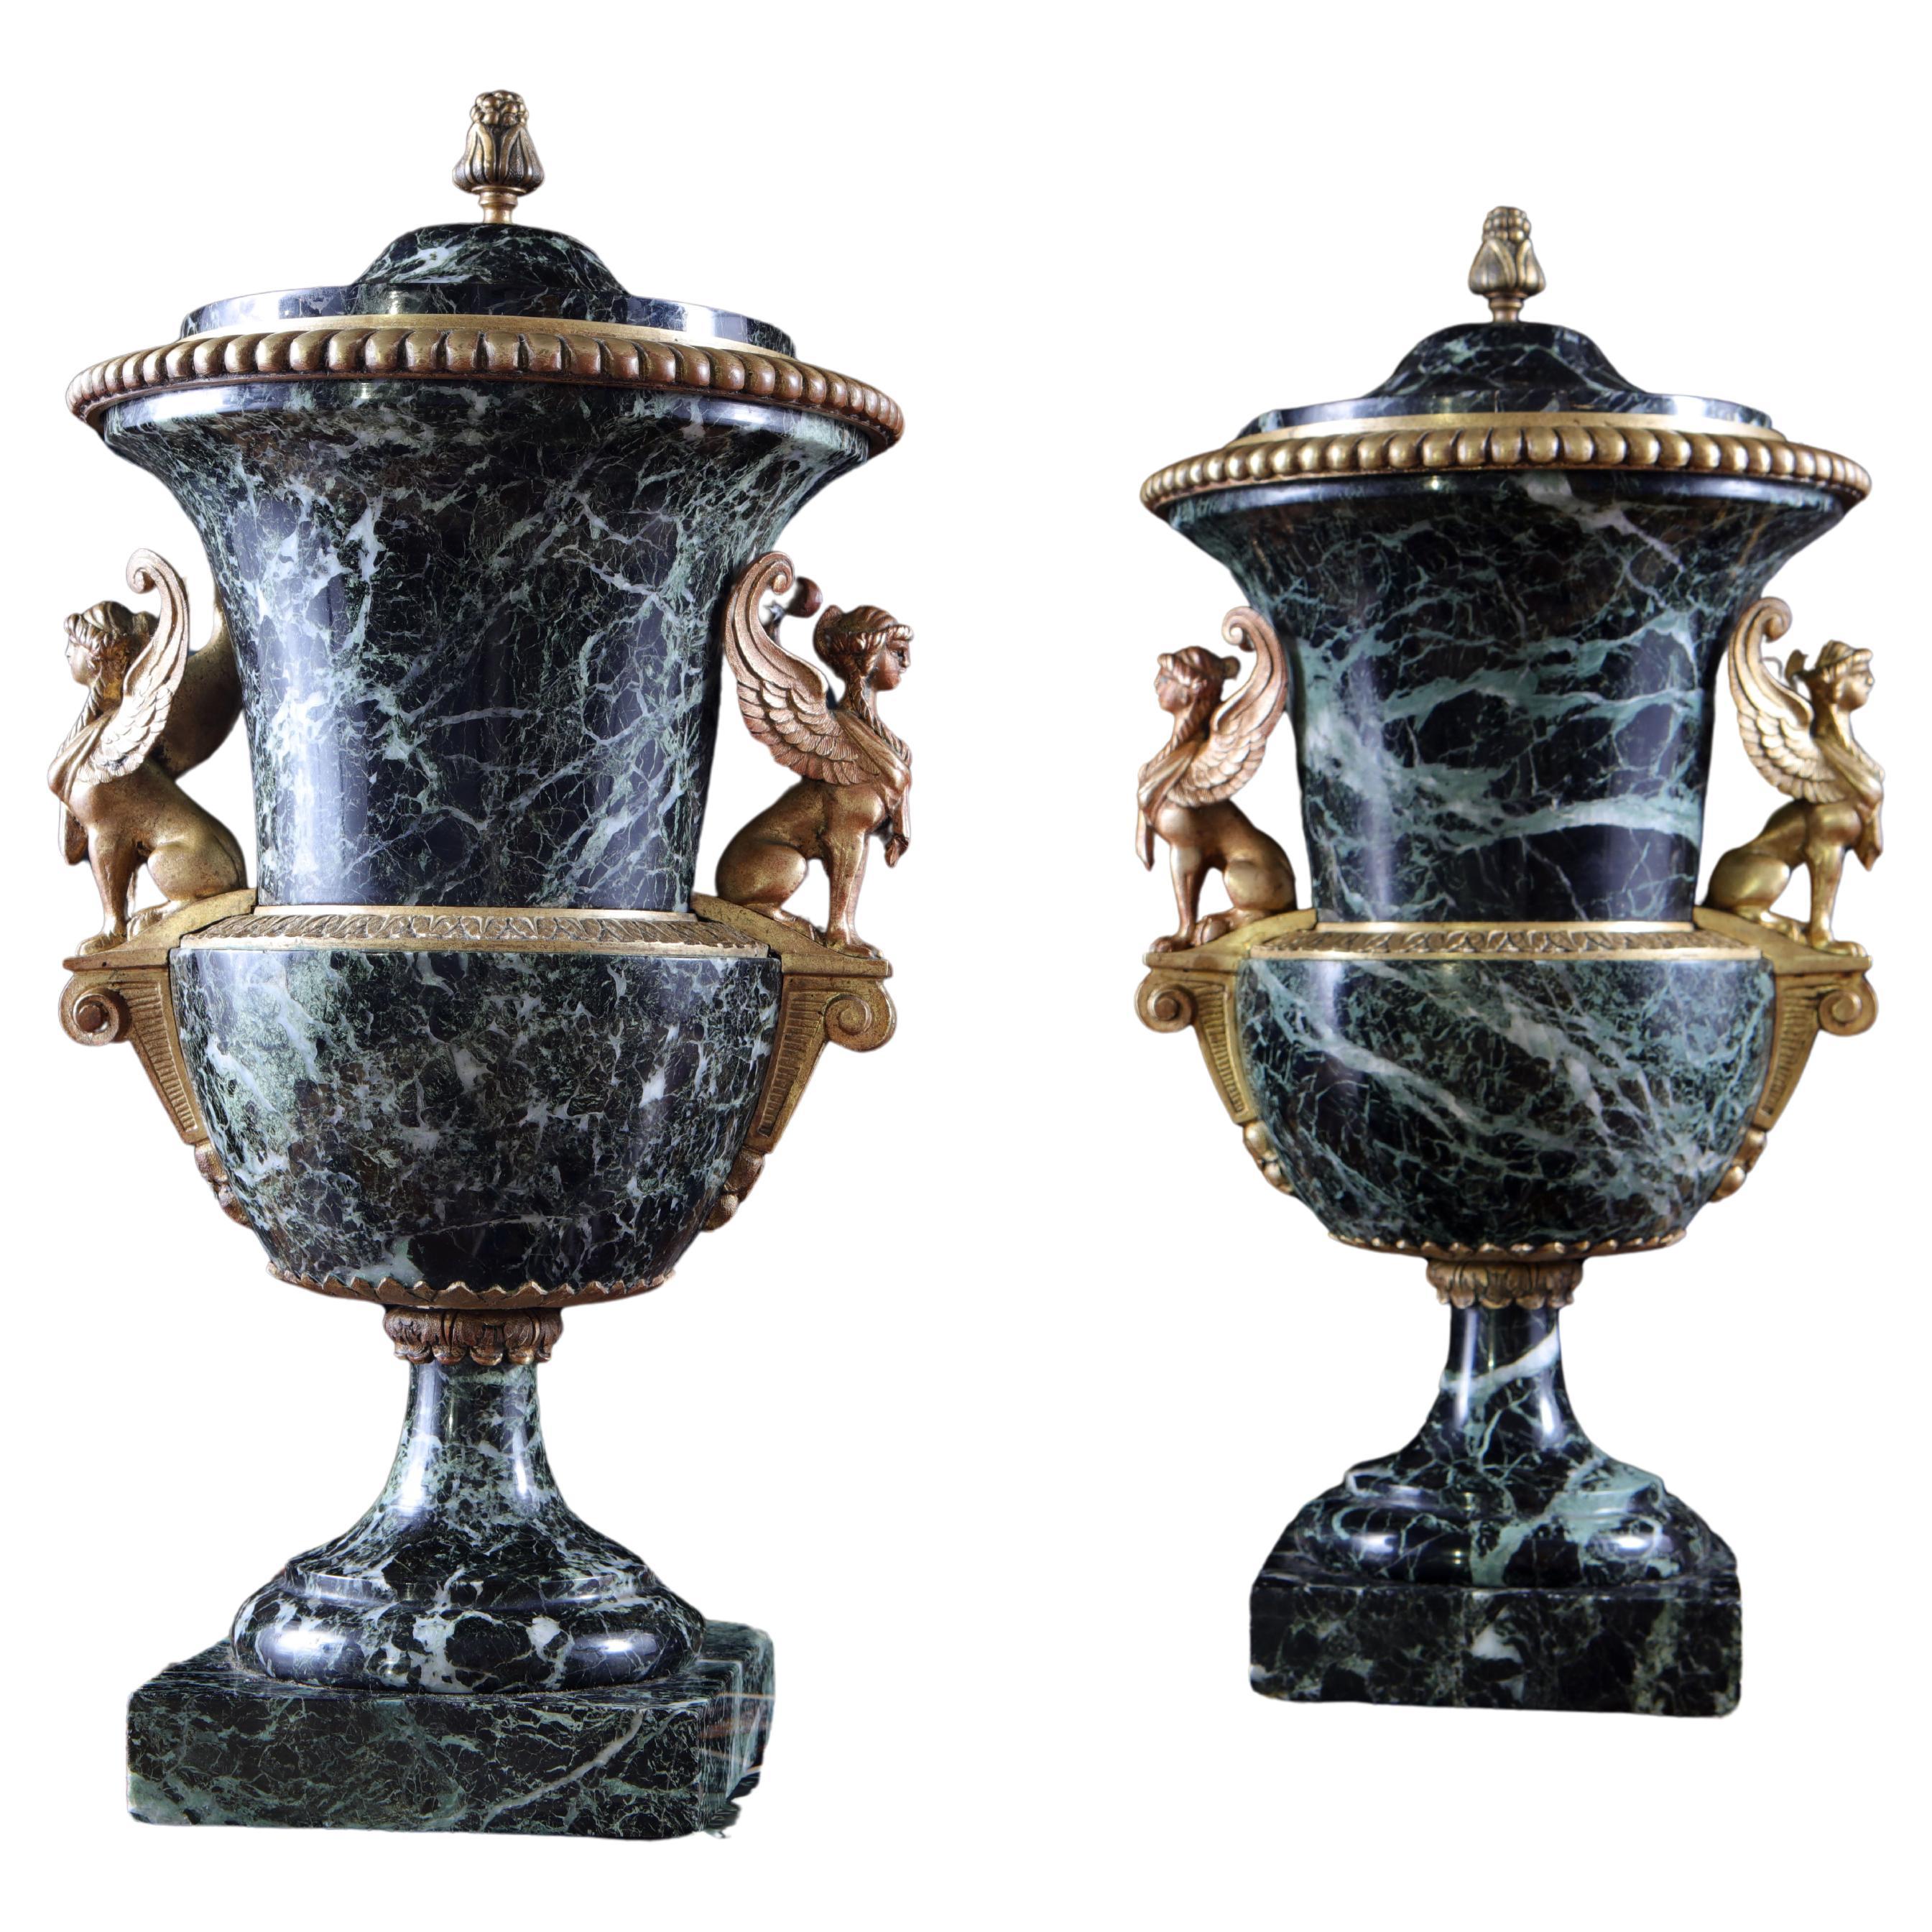 Pair Of Marble And Ormolu Classical Urns For Sale